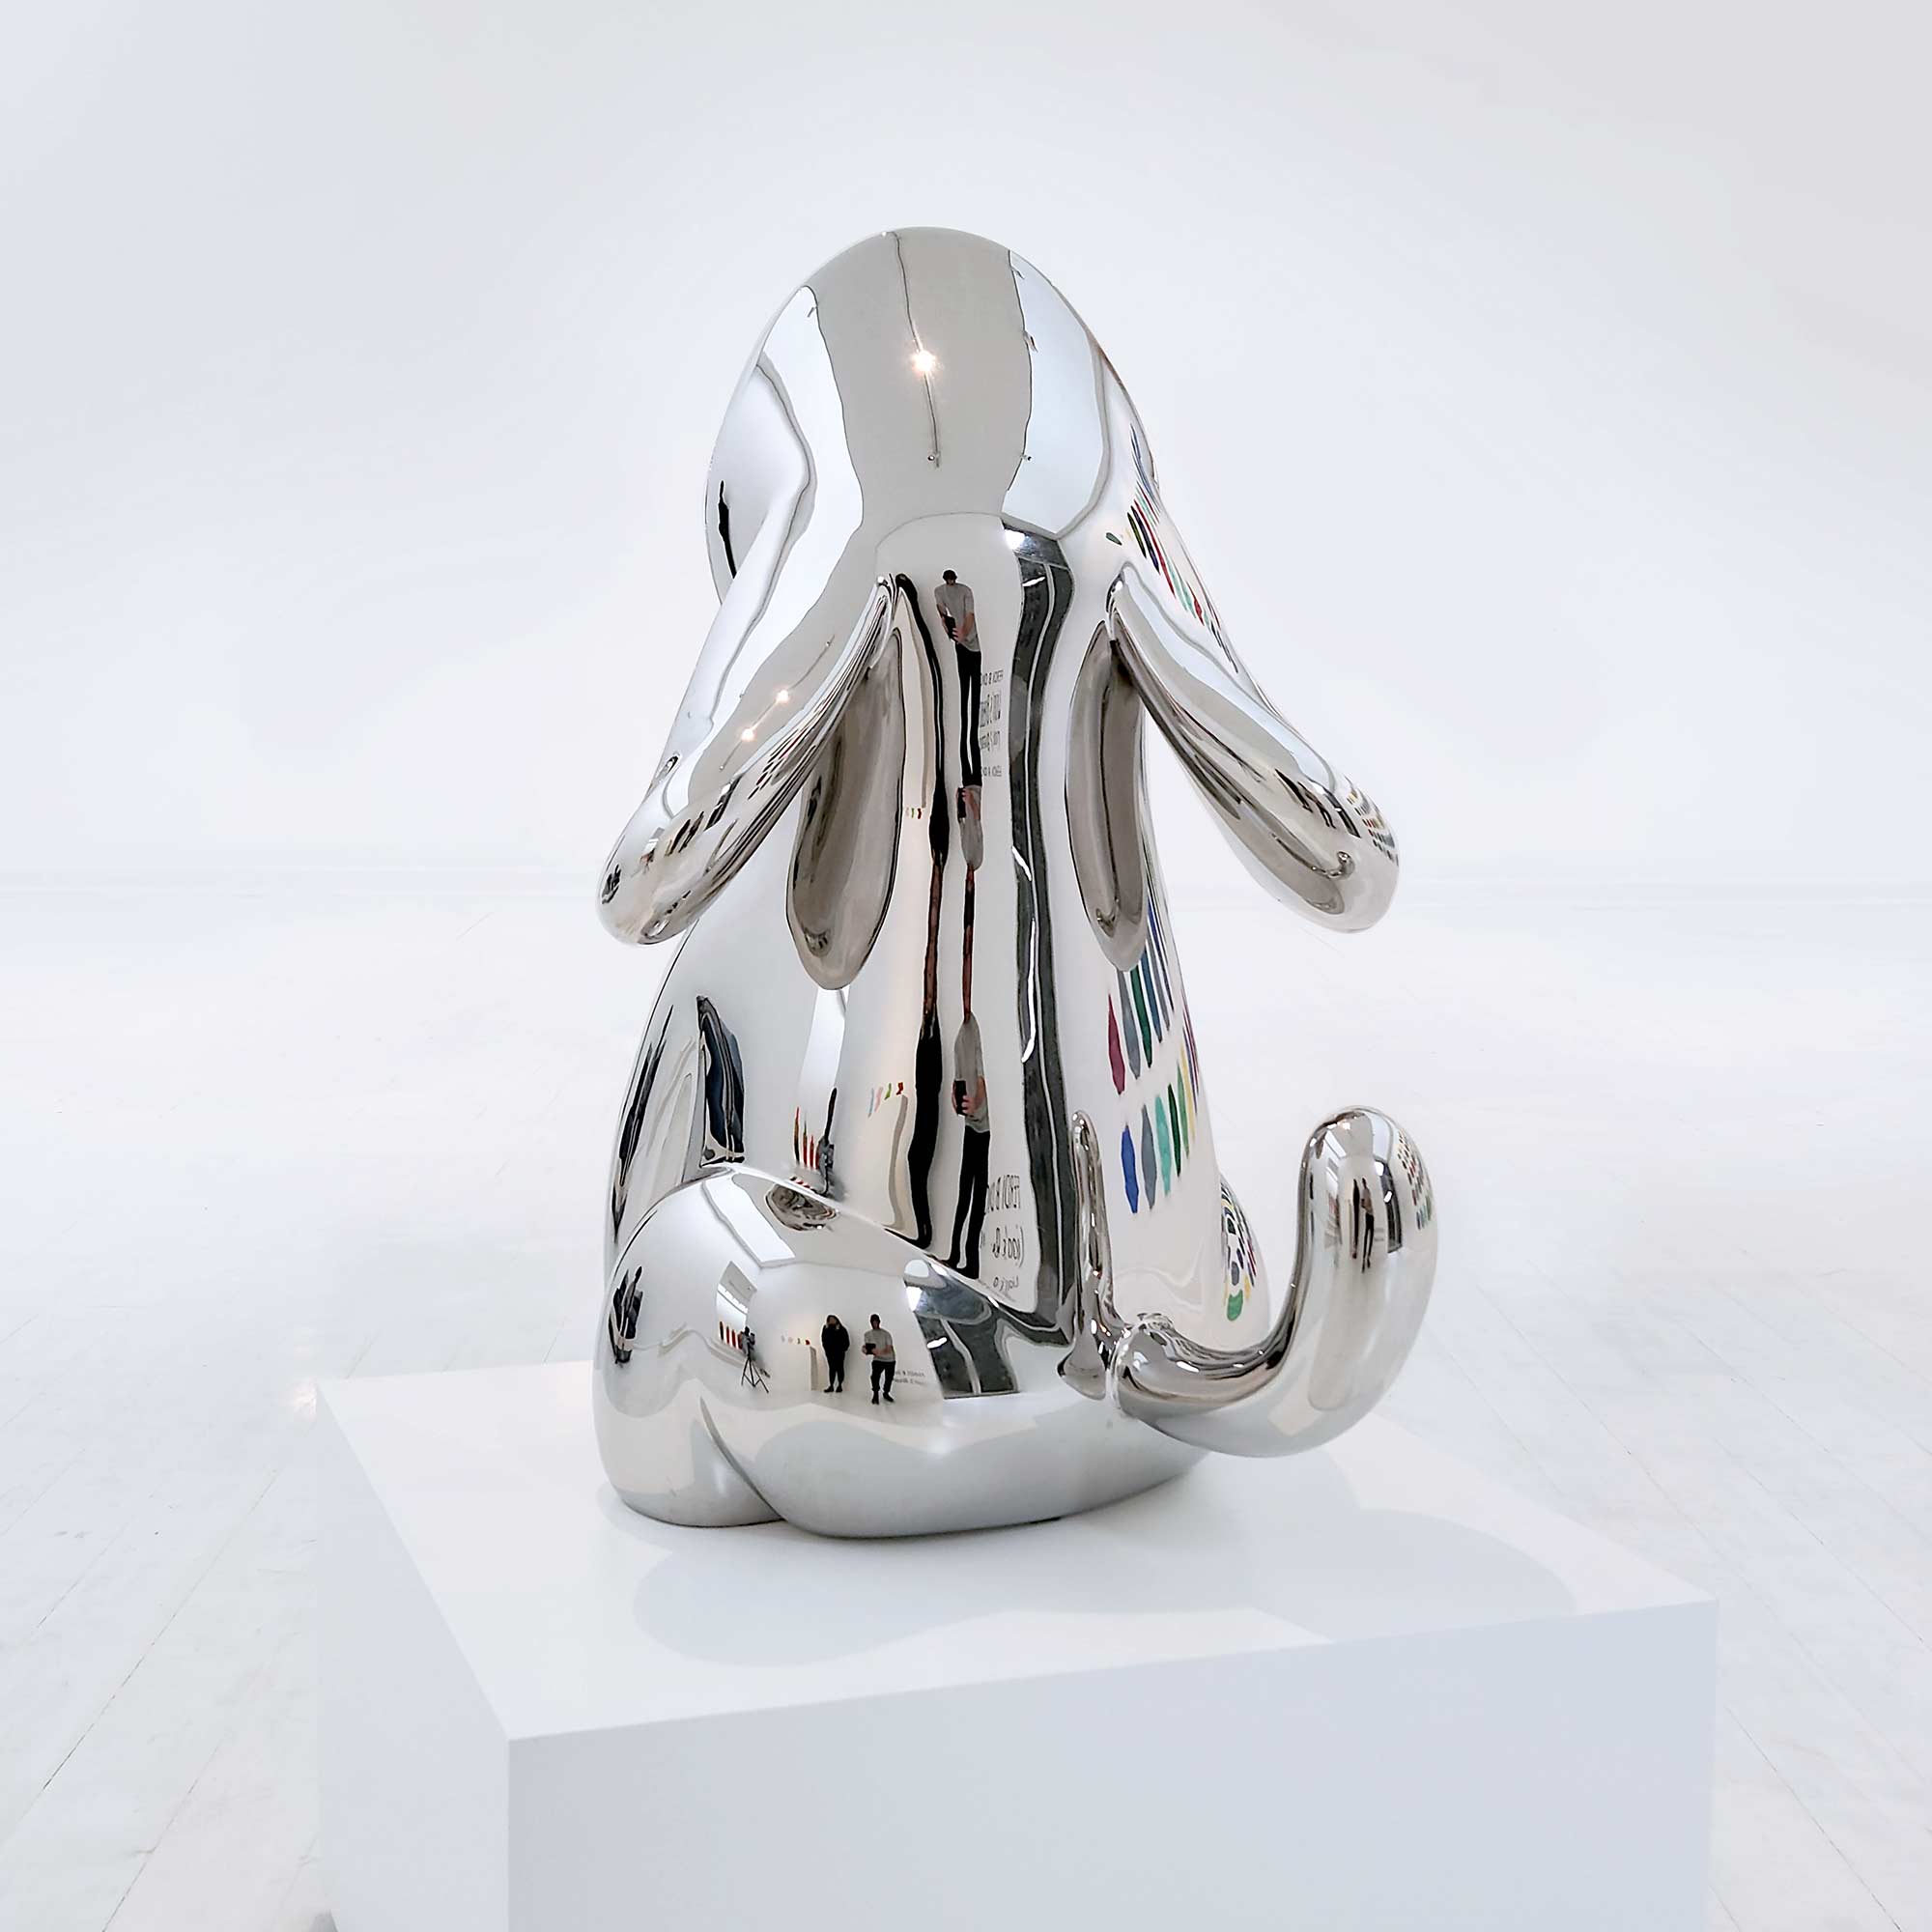 Dog Roar, Polished Stainless steel sculpture, 80 cm high by Ferdi B Dick, back view